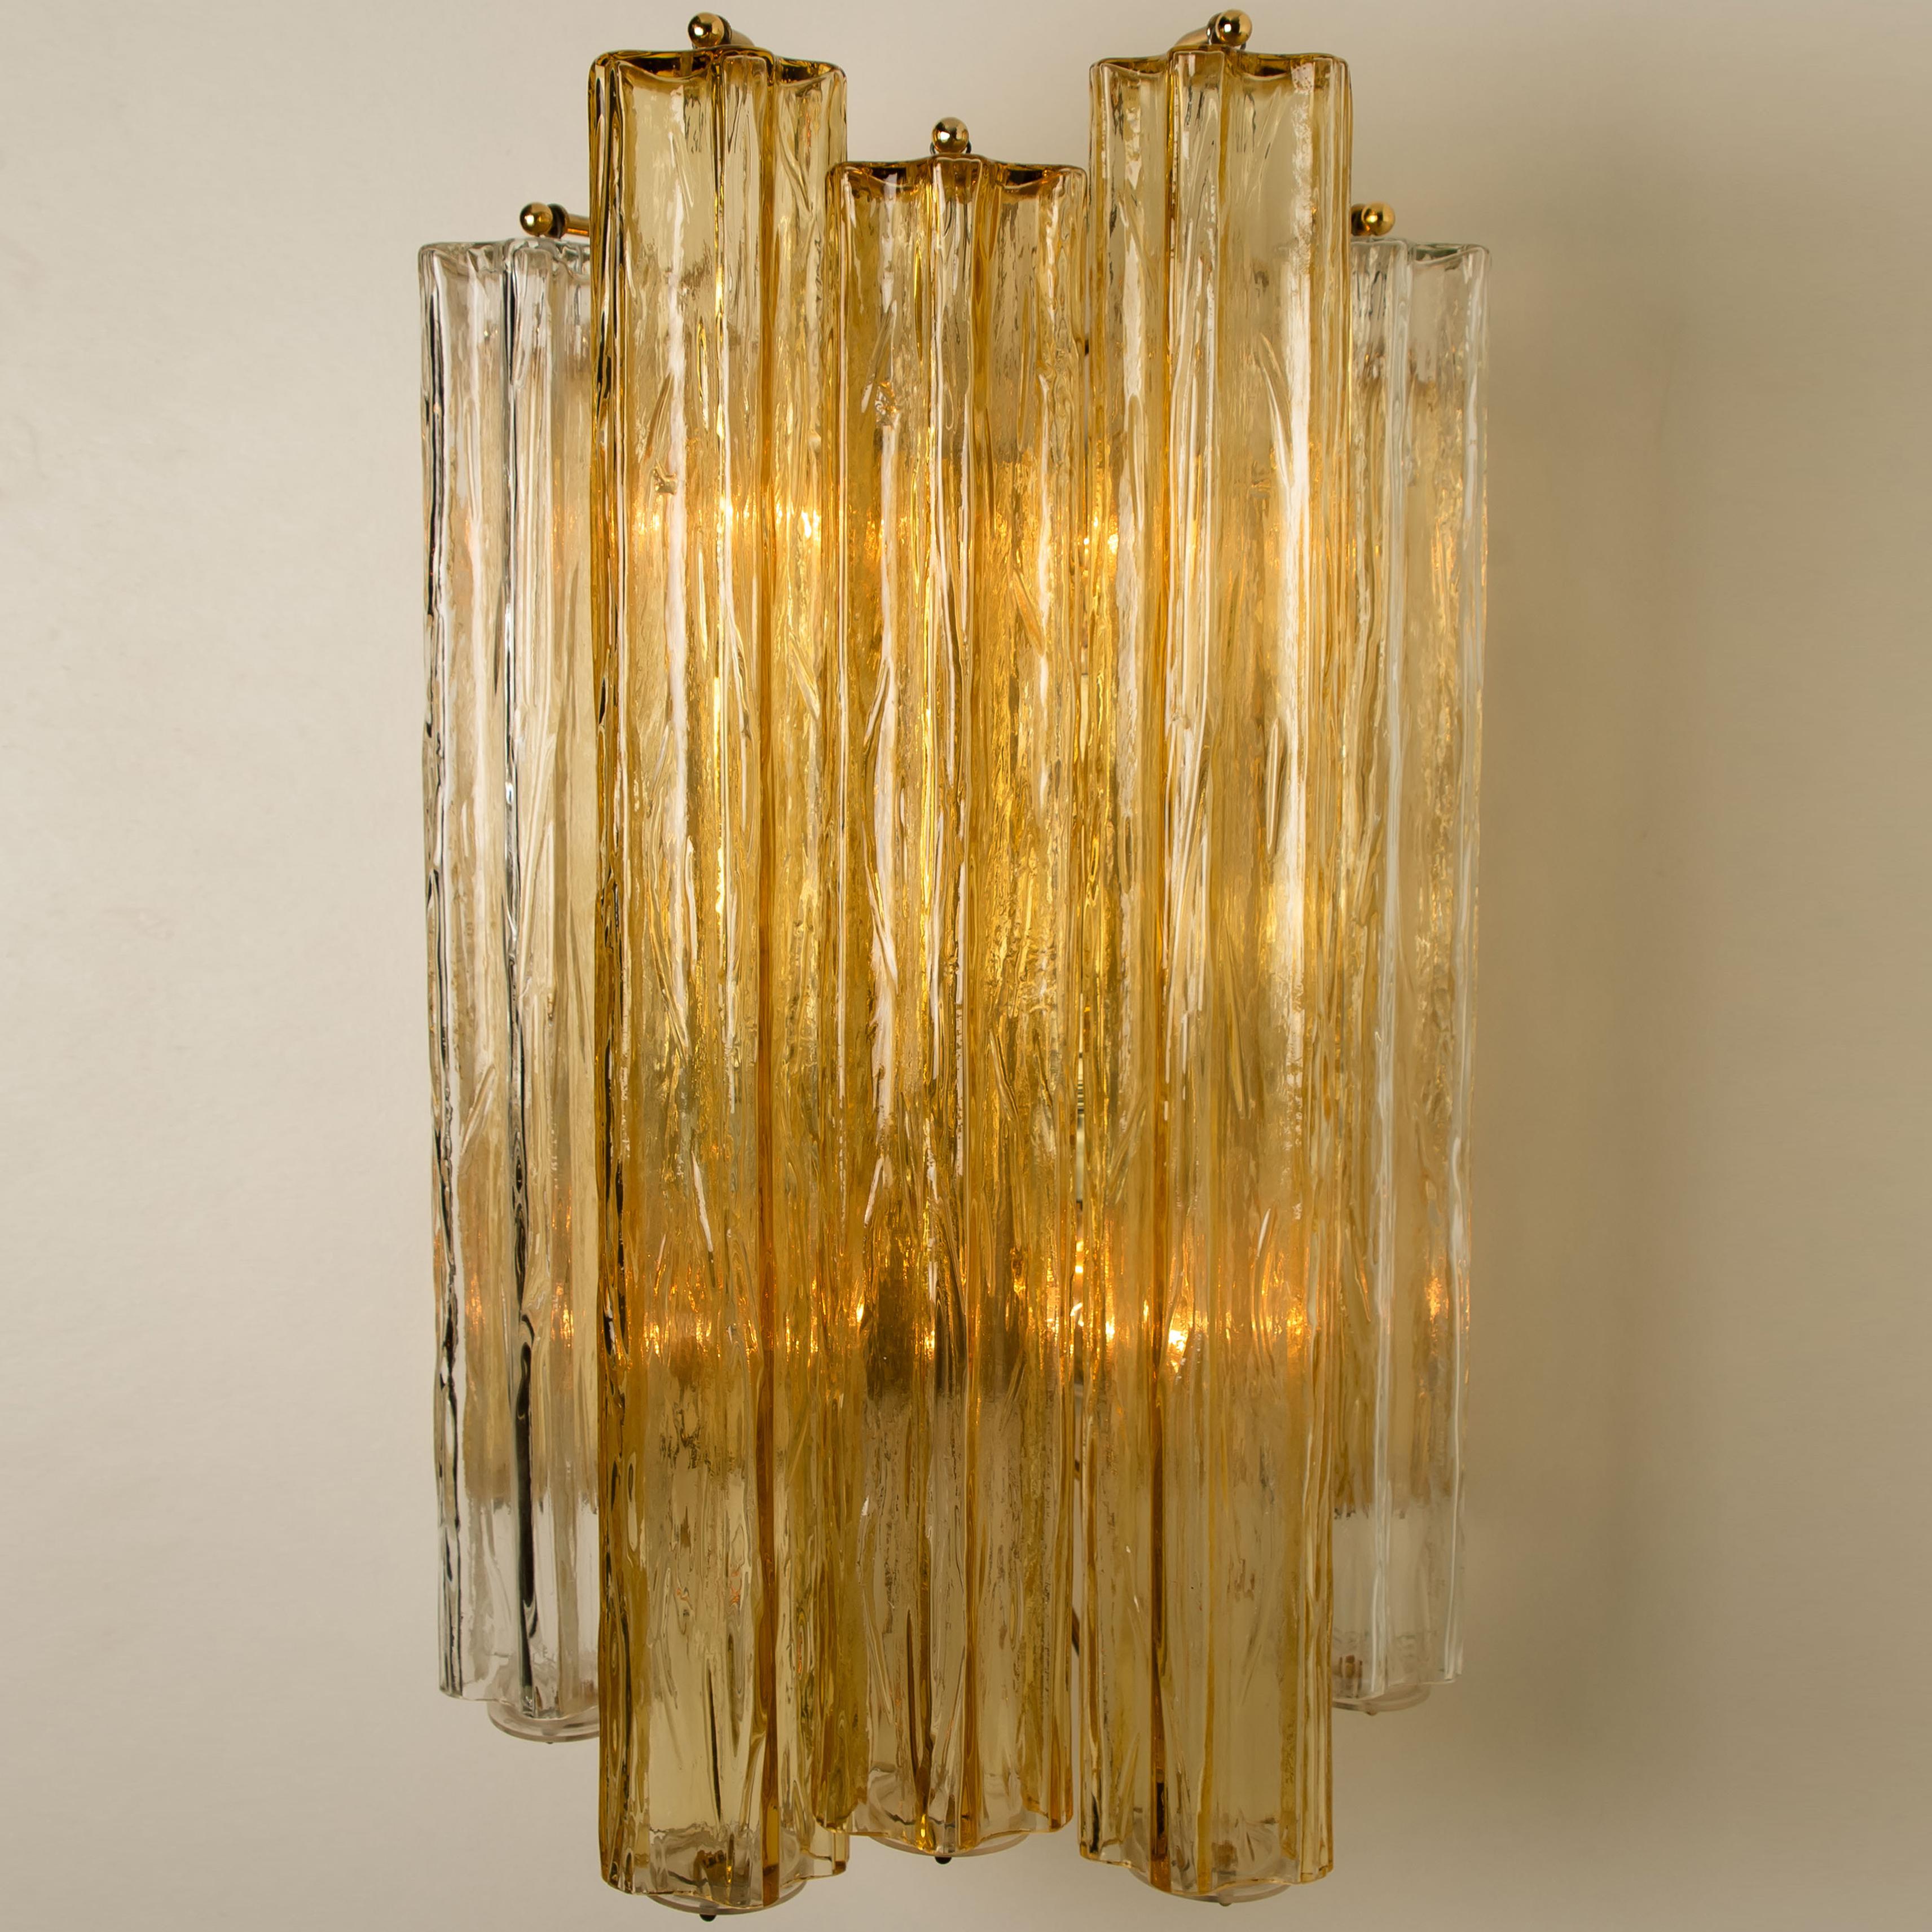 1 of the 4 Extra Large Wall Sconces or Wall Lights Murano Glass, Barovier & Toso 4